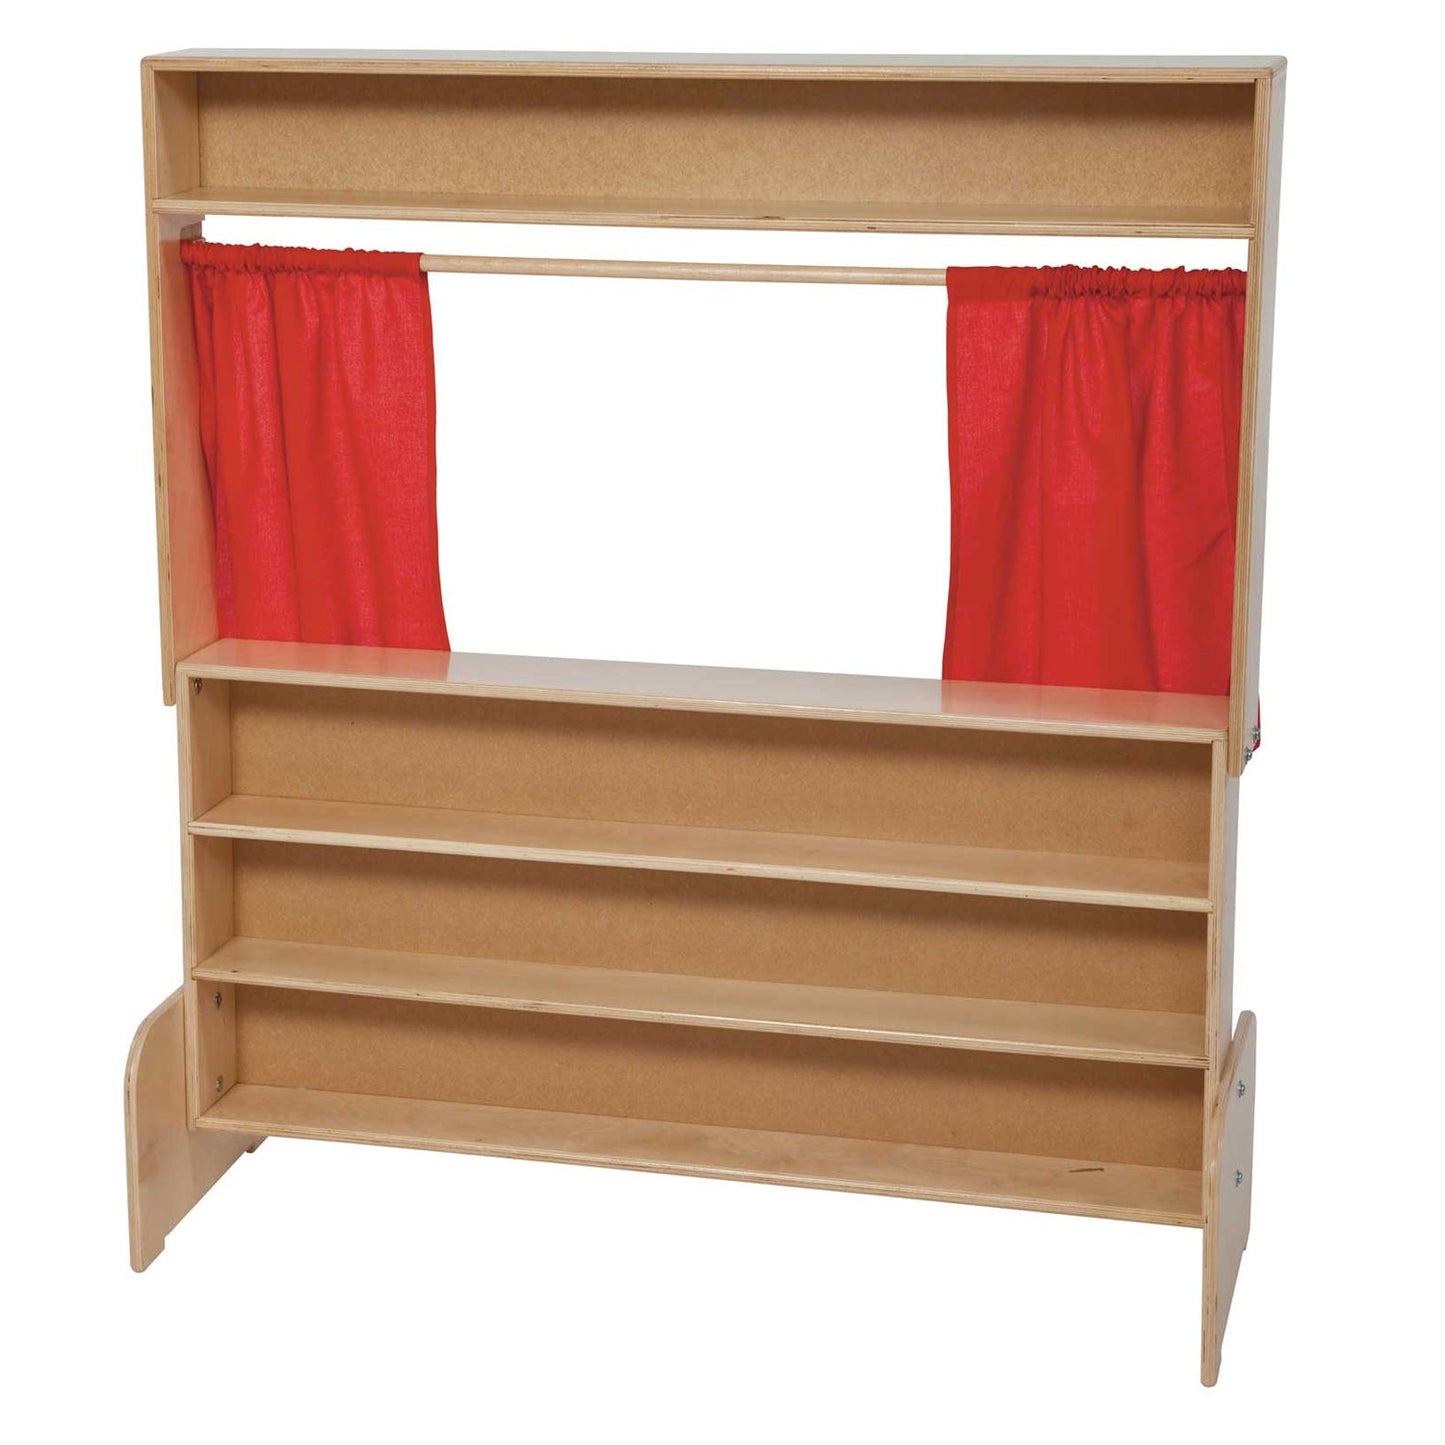 Wood Designs Deluxe Puppet Theater with Flannelboard (Wood Designs WD21652) - SchoolOutlet